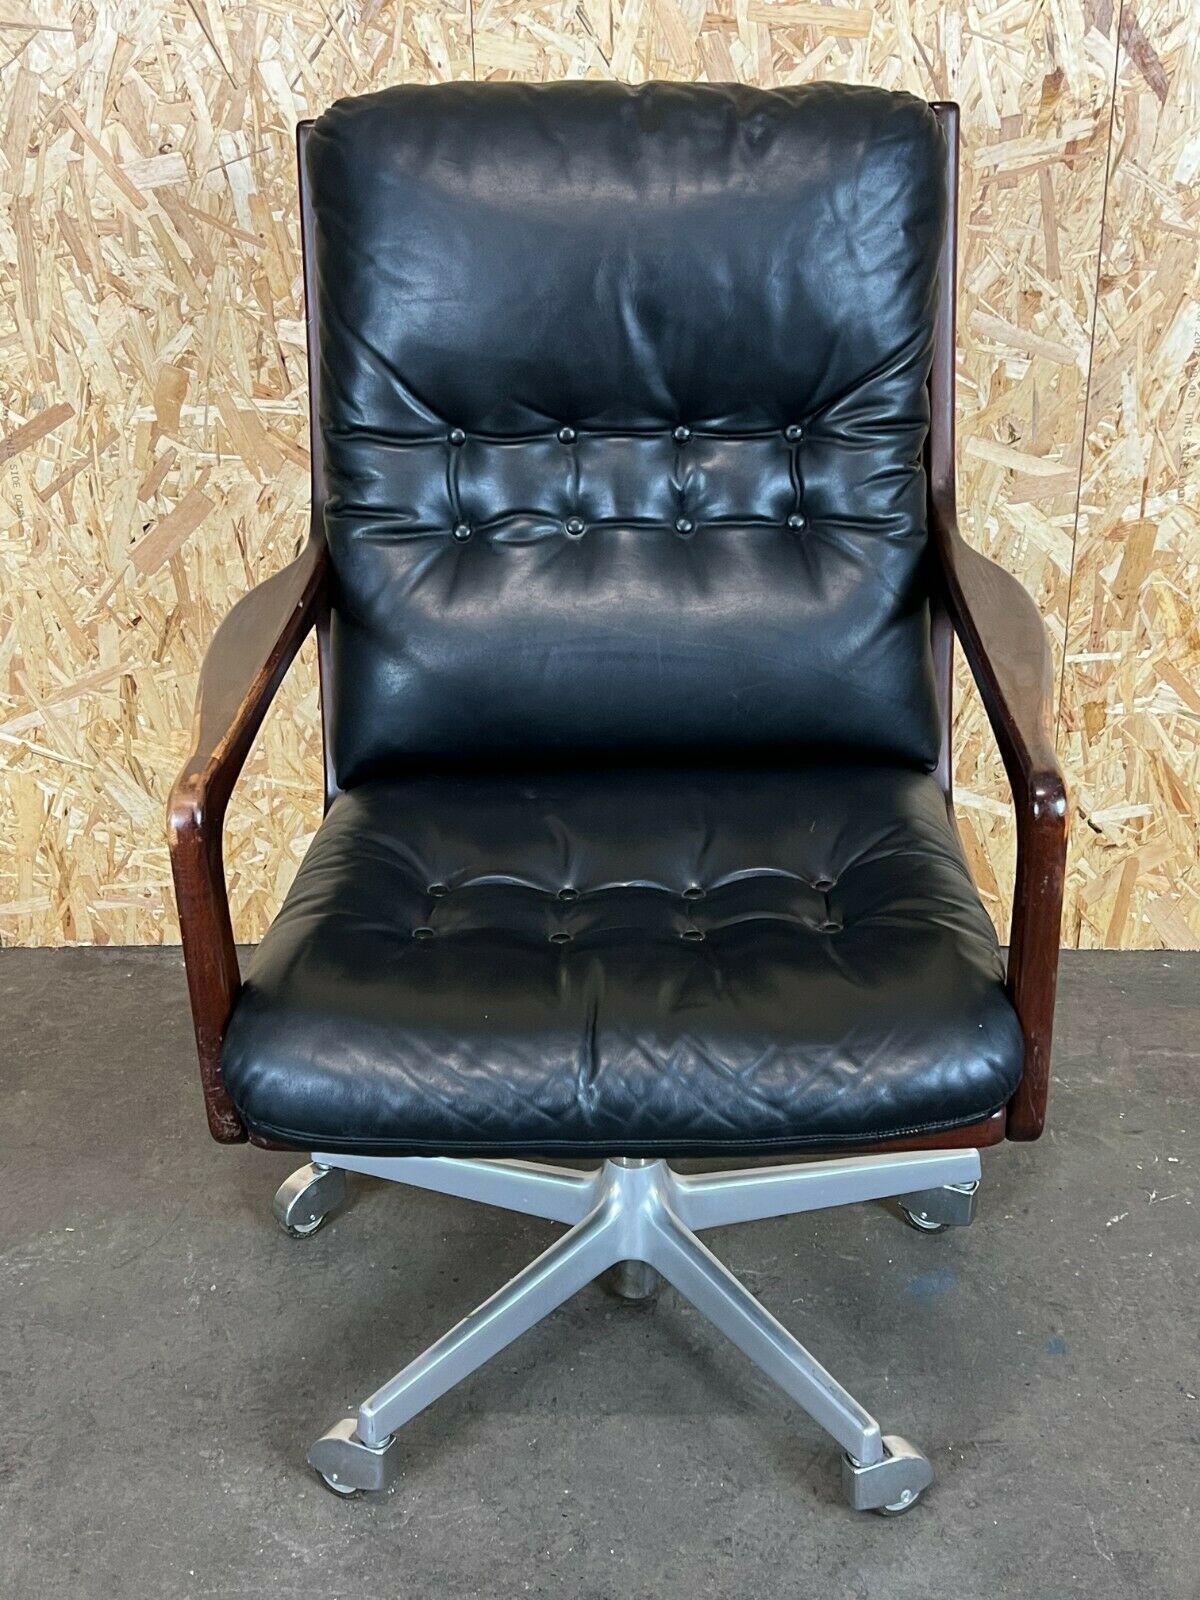 60s office chair